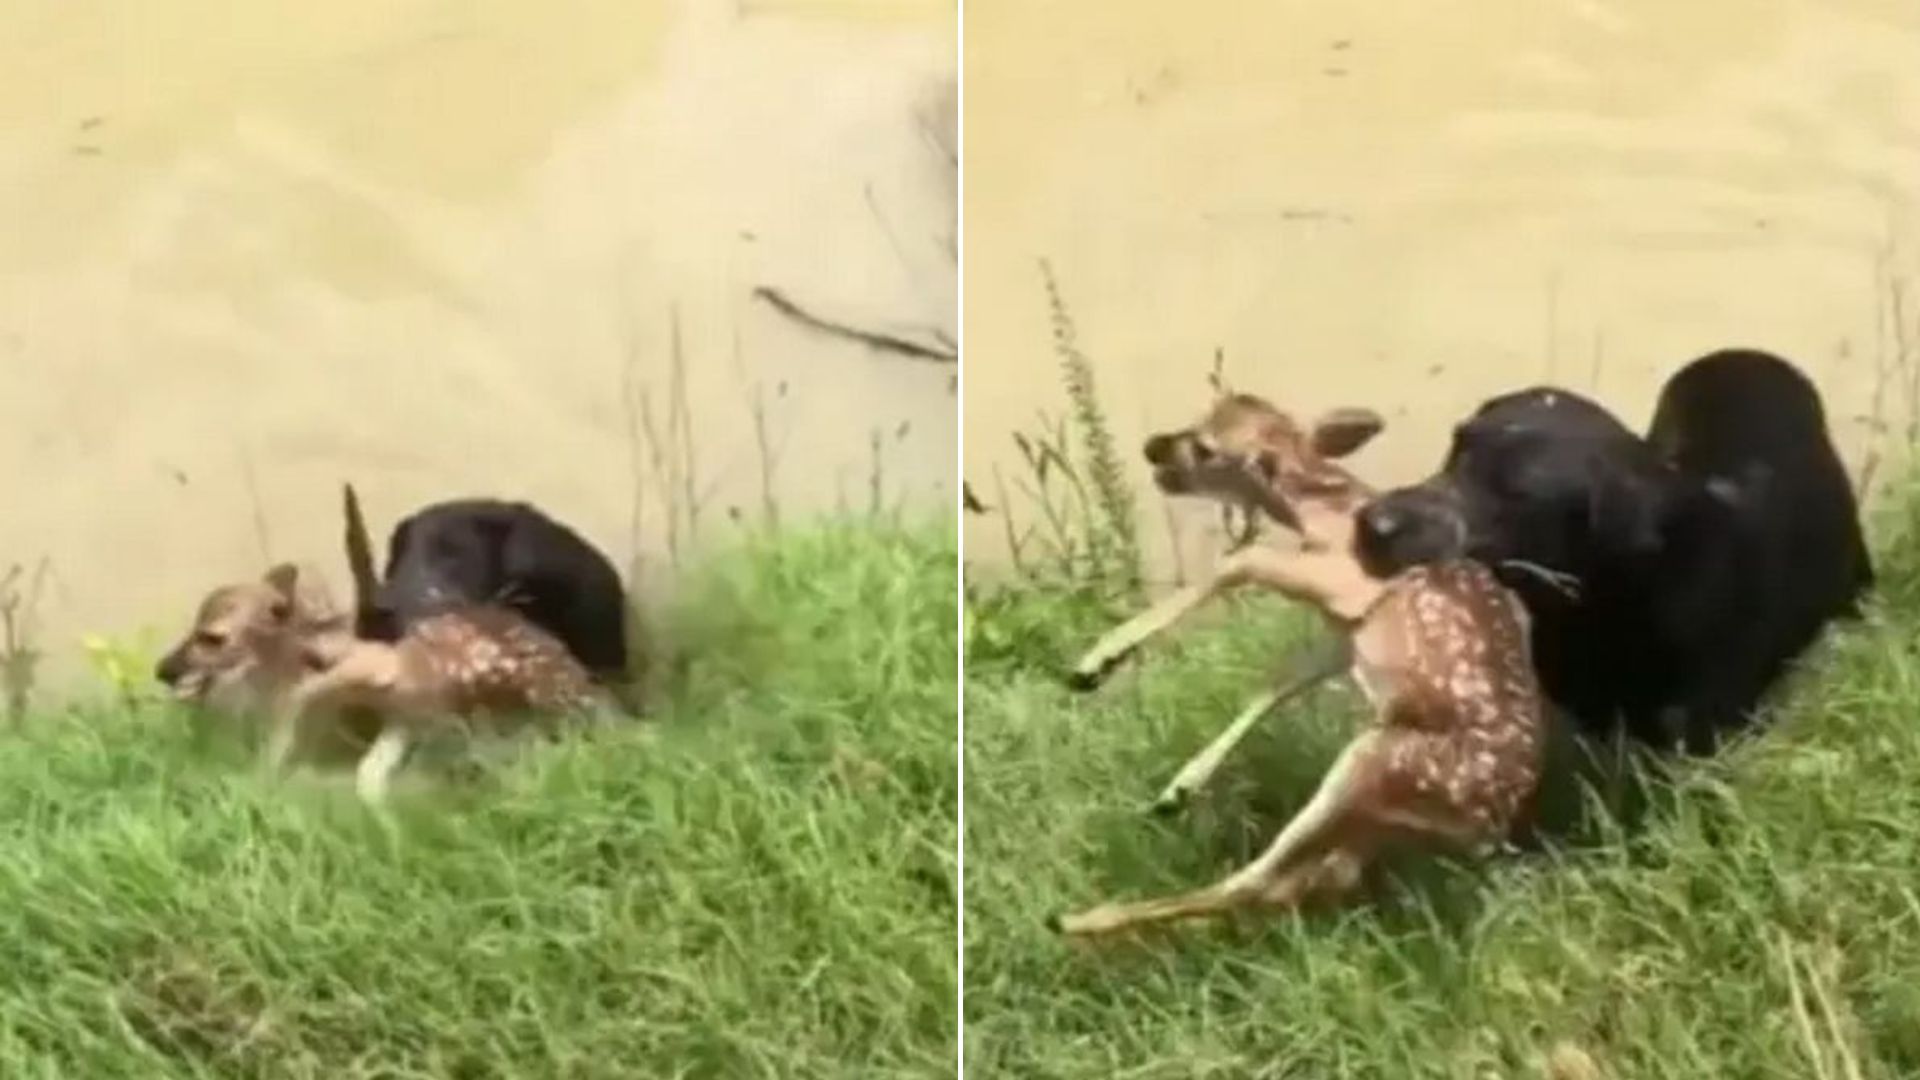 Hero Labrador Dog Jumps Into River And Saves Tiny Fawn From Drowning